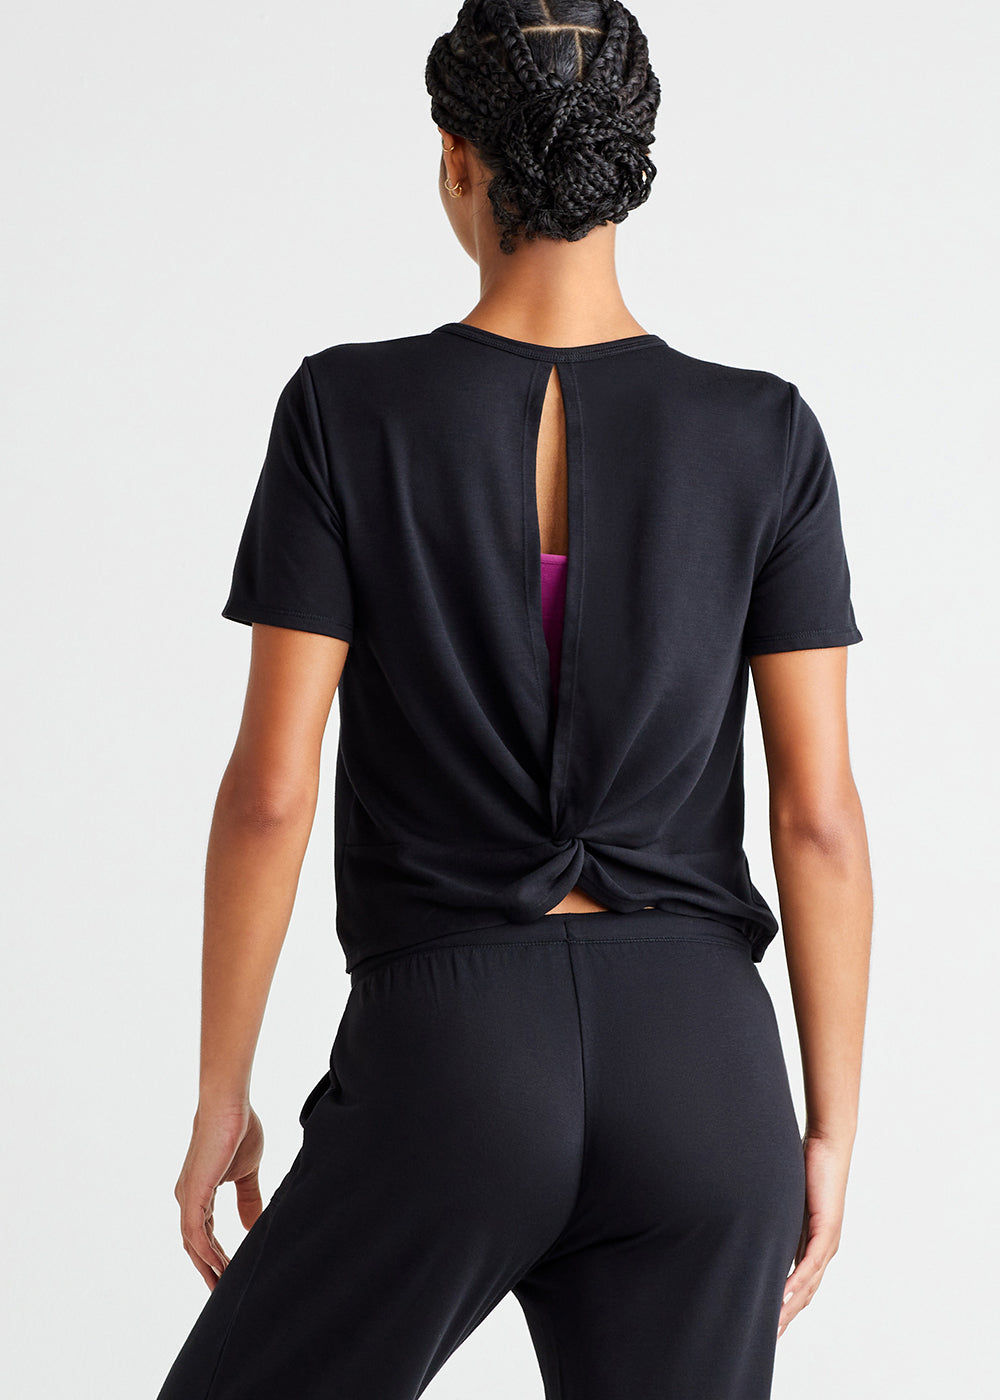 peek-a-boo twist back lounge top - baby french terry in Black worn by a woman facing backward Yummie